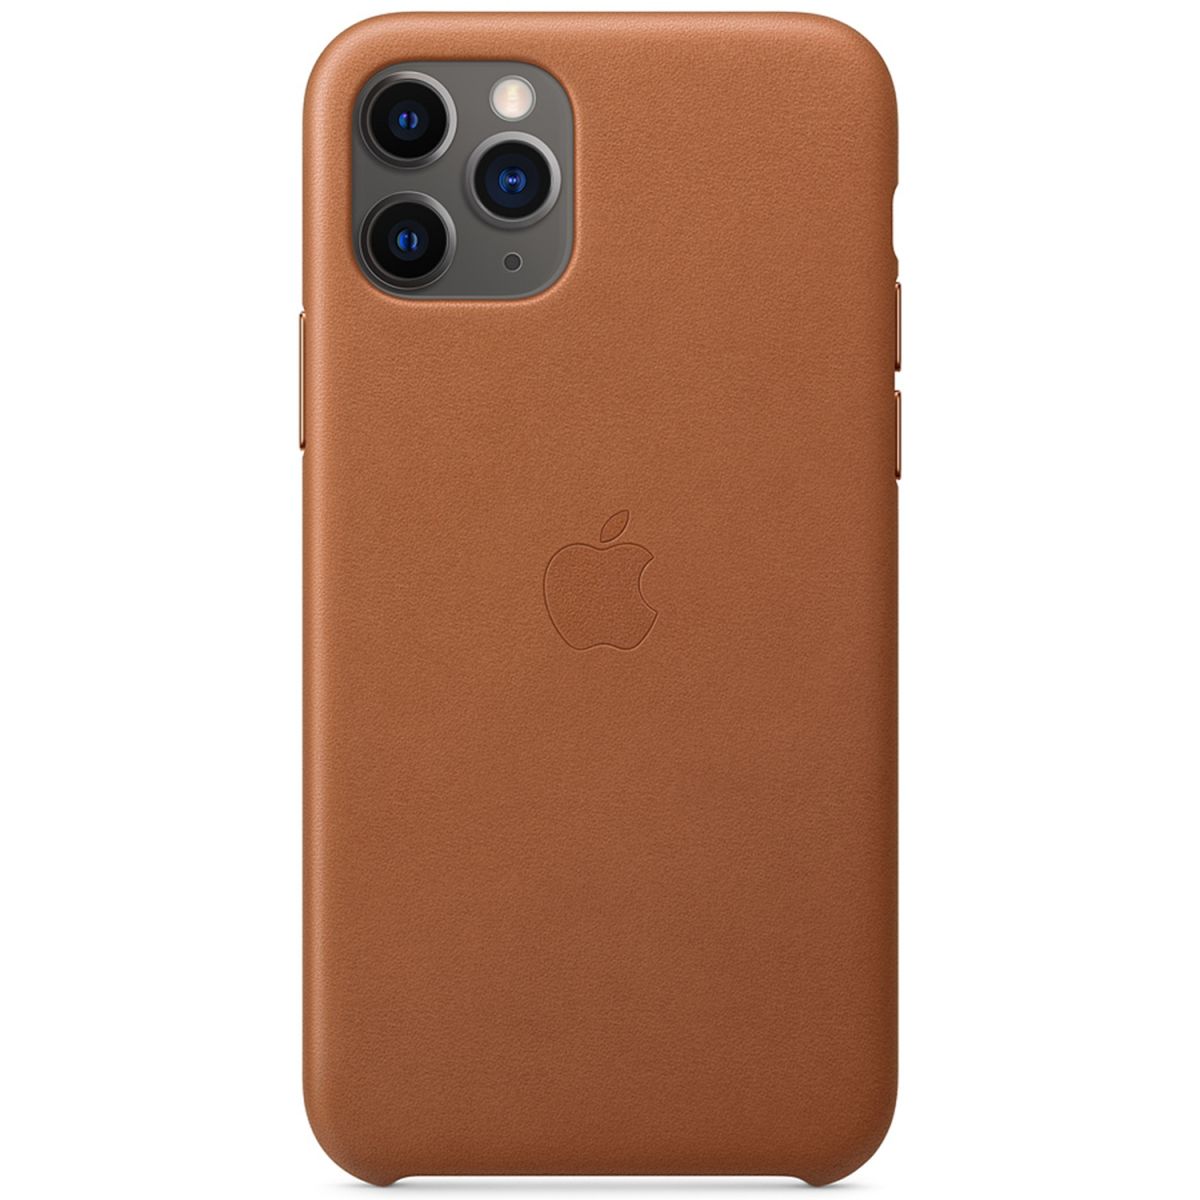 Apple Leather Backcover for iPhone 11 Pro Max - Saddle Brown